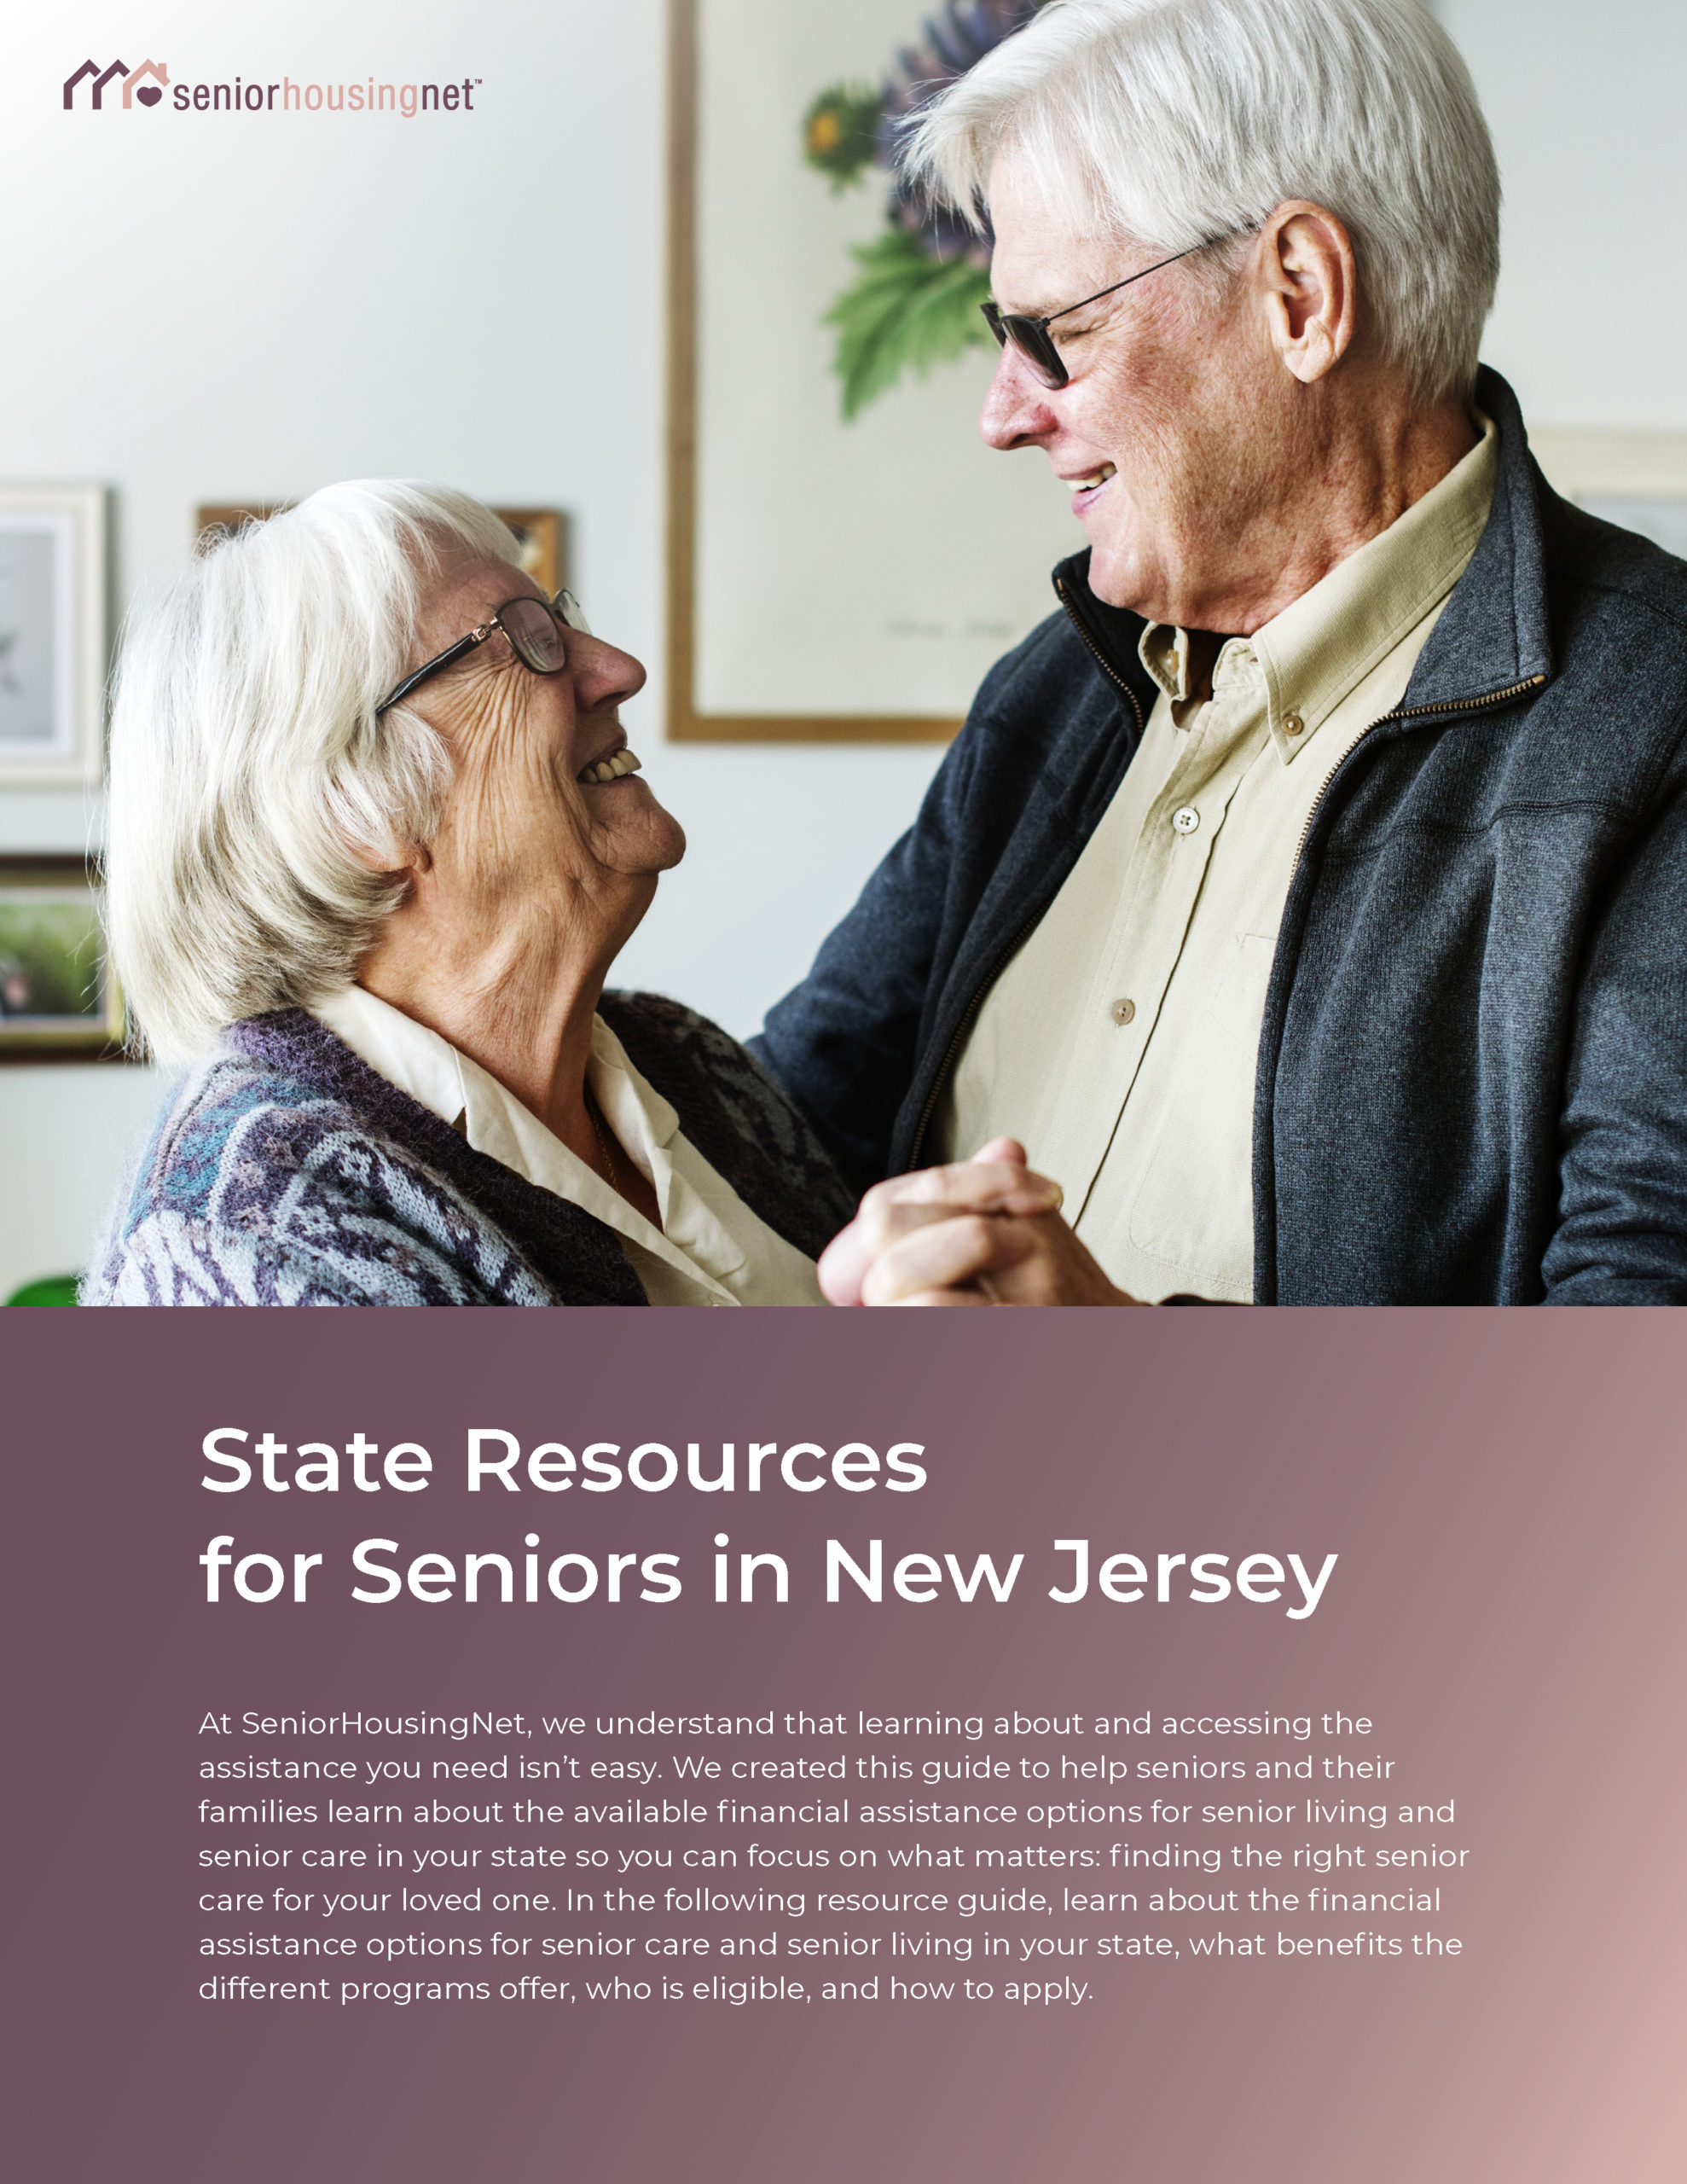 State Resources for Seniors in New Jersey